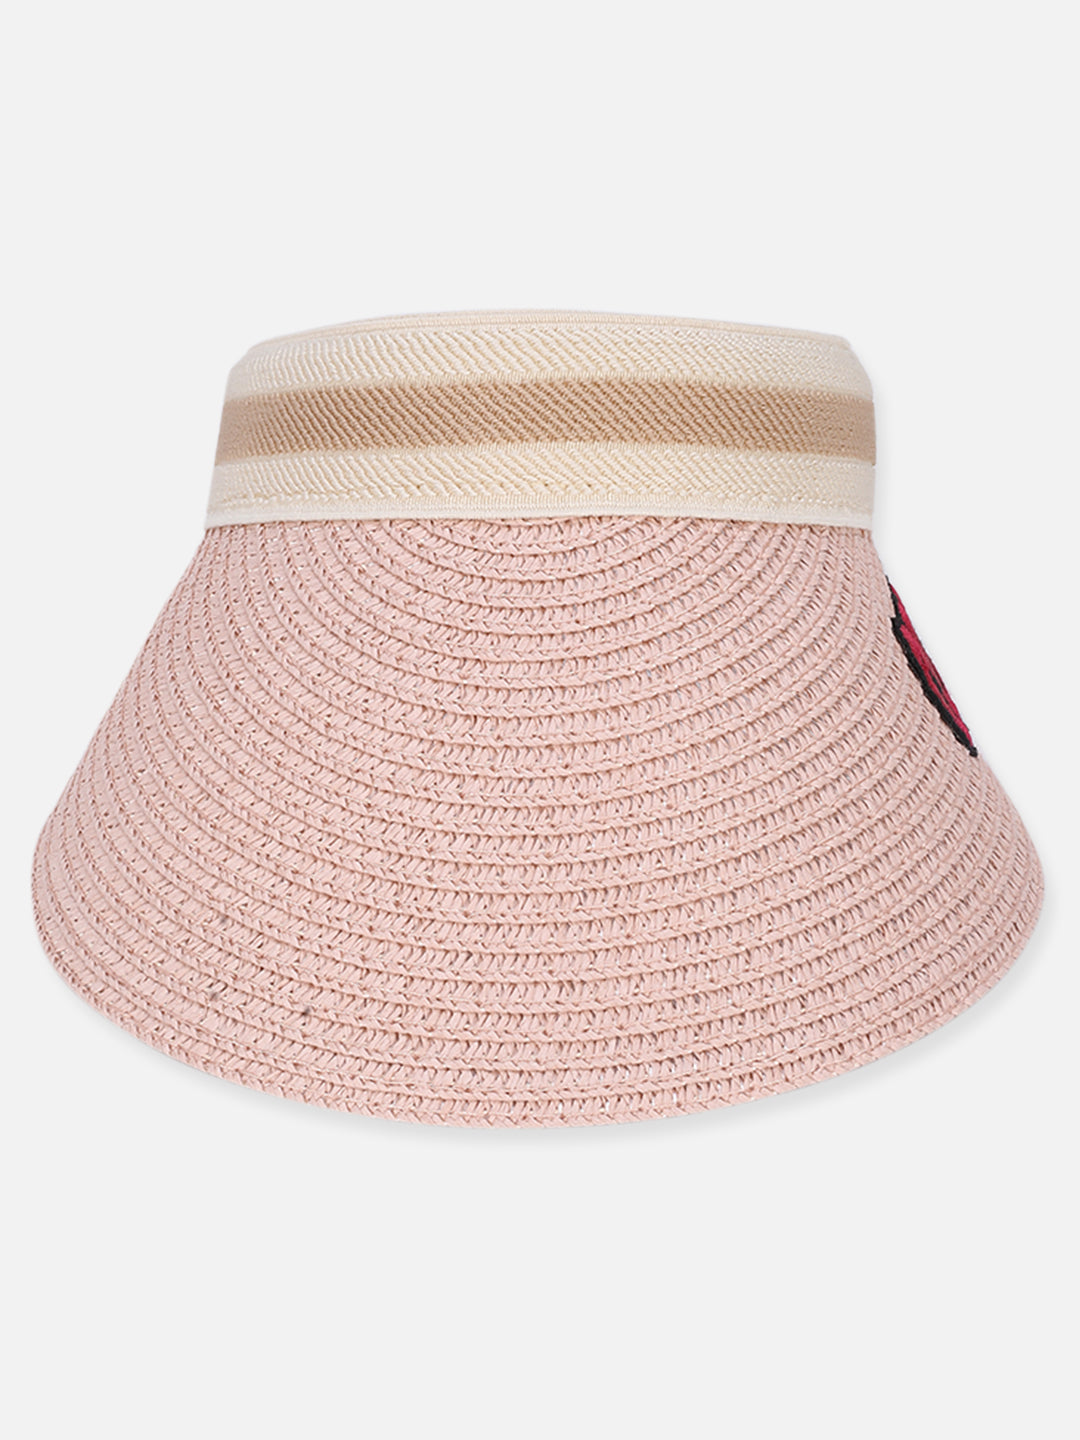 One Friday Pink Solid Sunhat